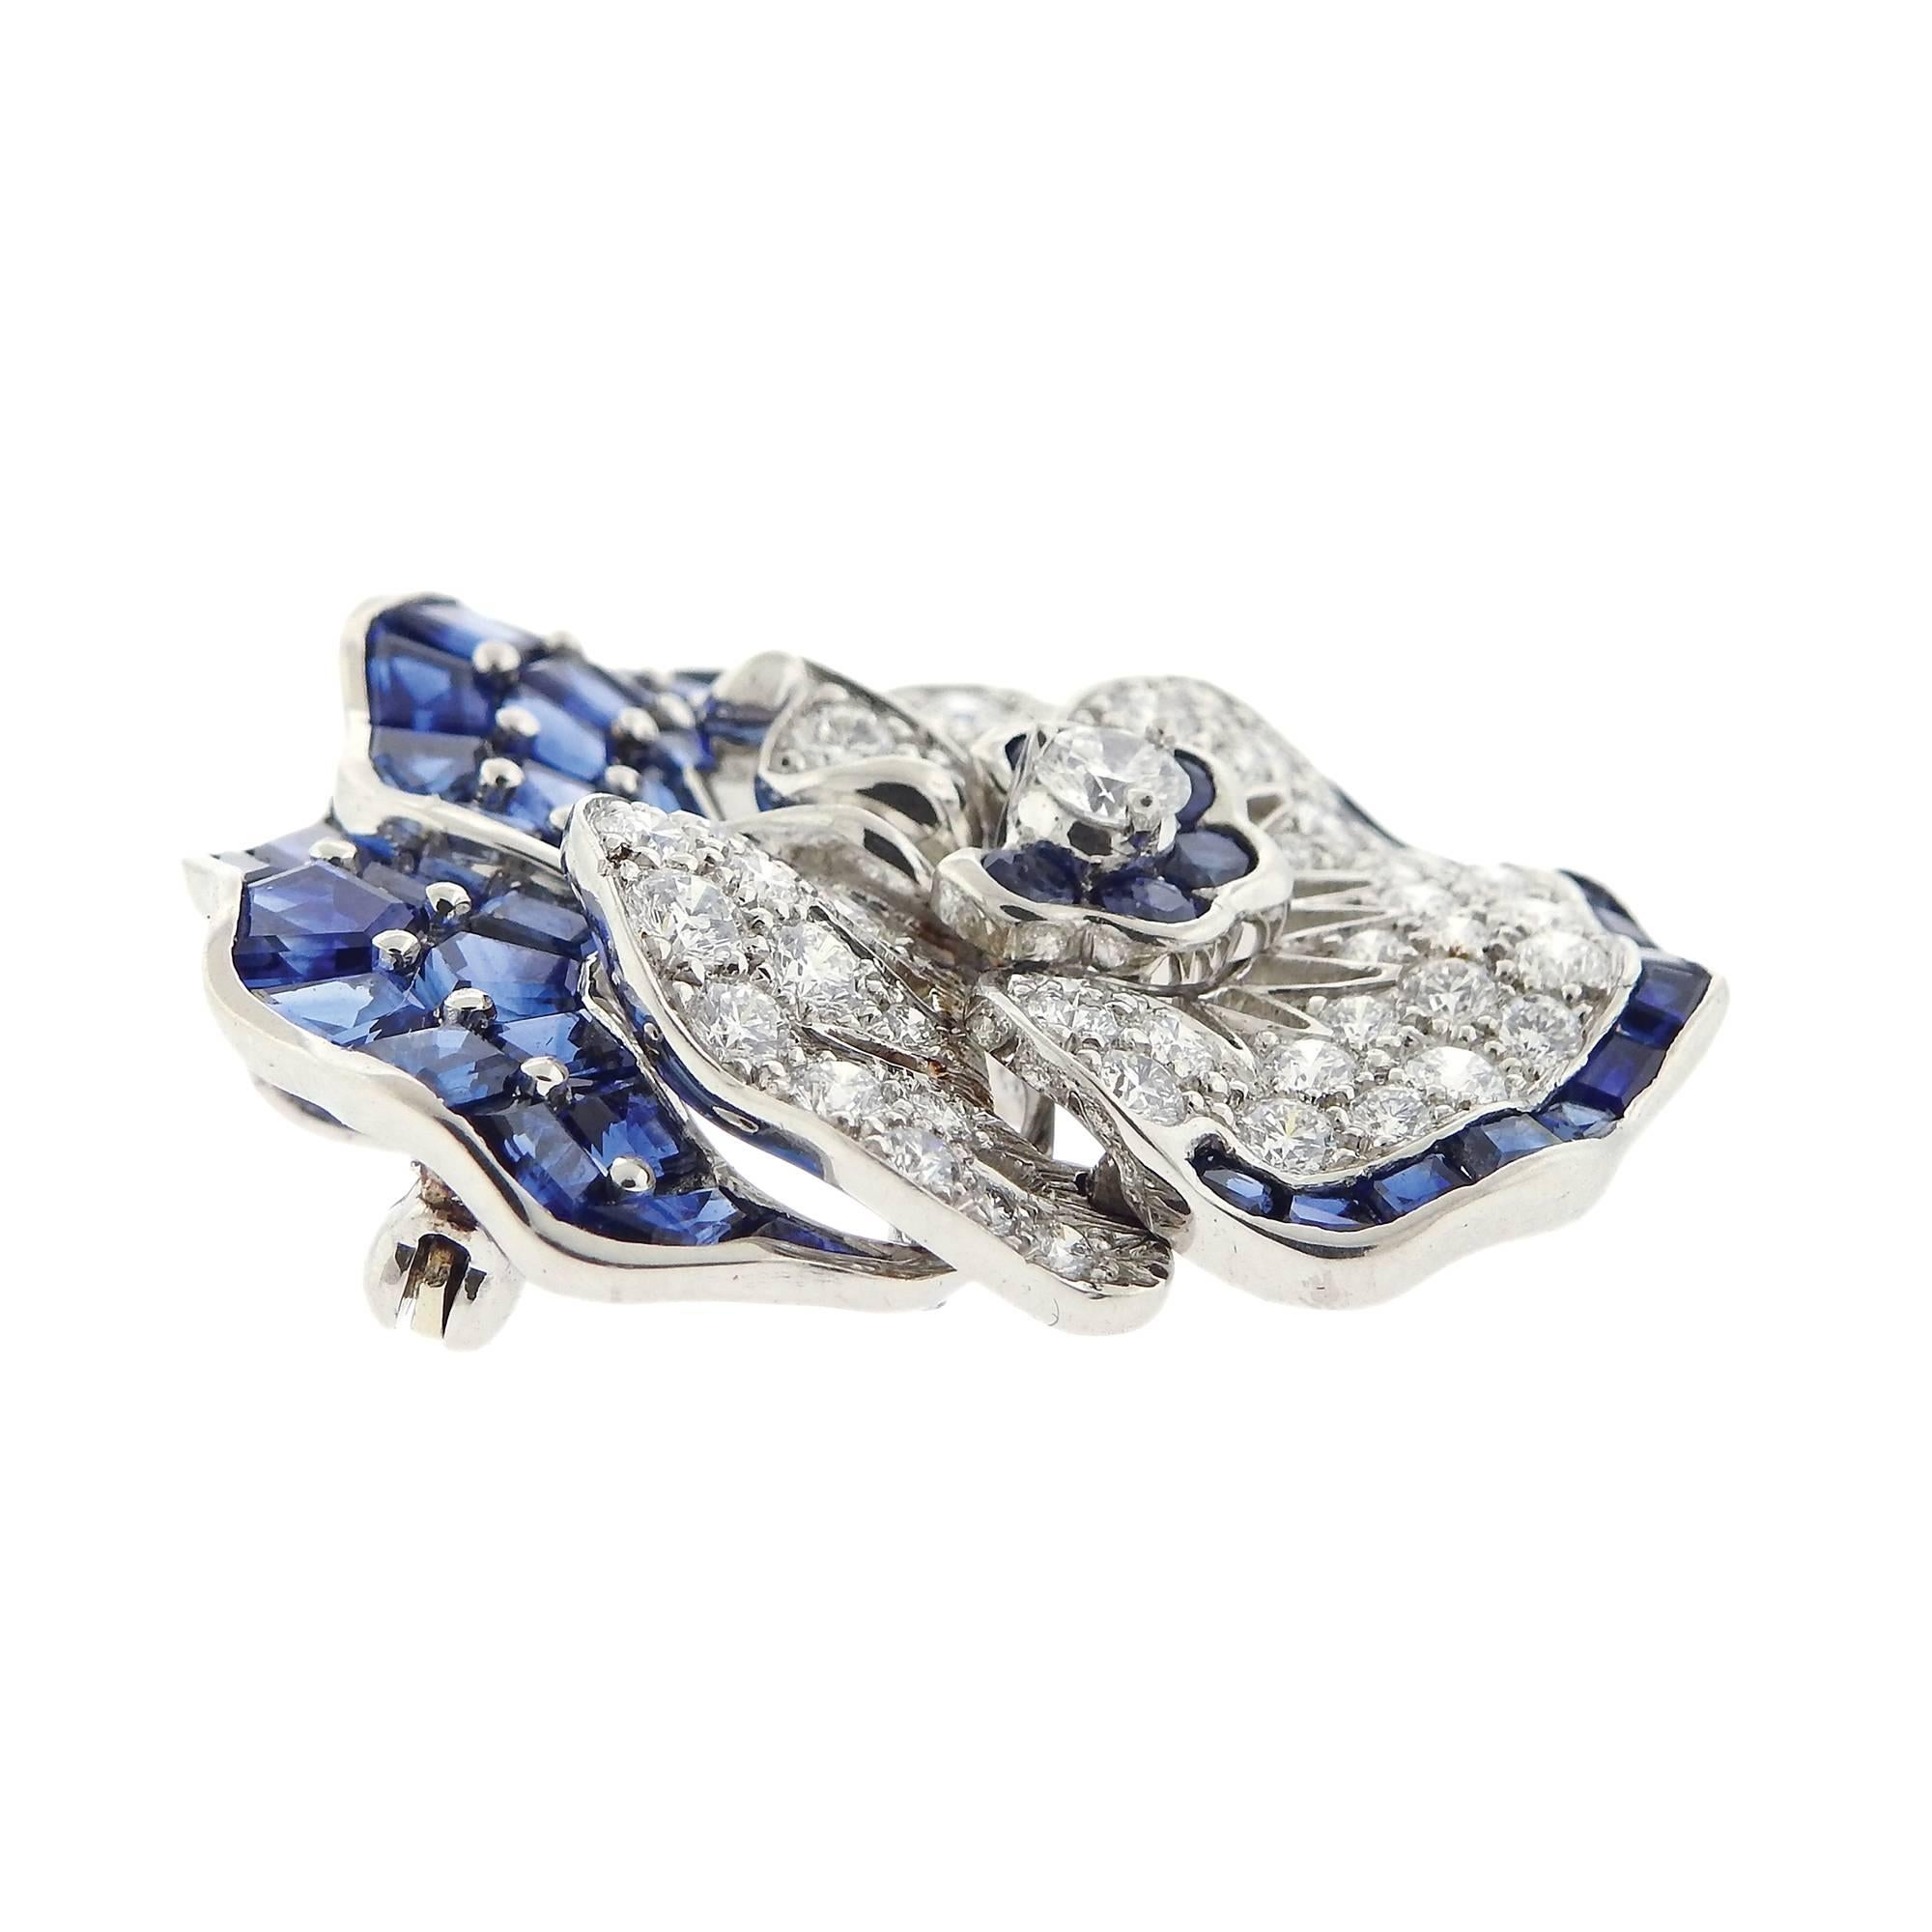 Iconic platinum pansy flower brooch, crafted by Oscar Heyman, decorated with approximately 3.25ctw in diamonds and 9.00ctw in blue sapphires. Brooch measures 35mm x 33mm. Marked: pt900, 10% irid, Maker's mark, 200174. Weigh of the piece - 23.8 grams.